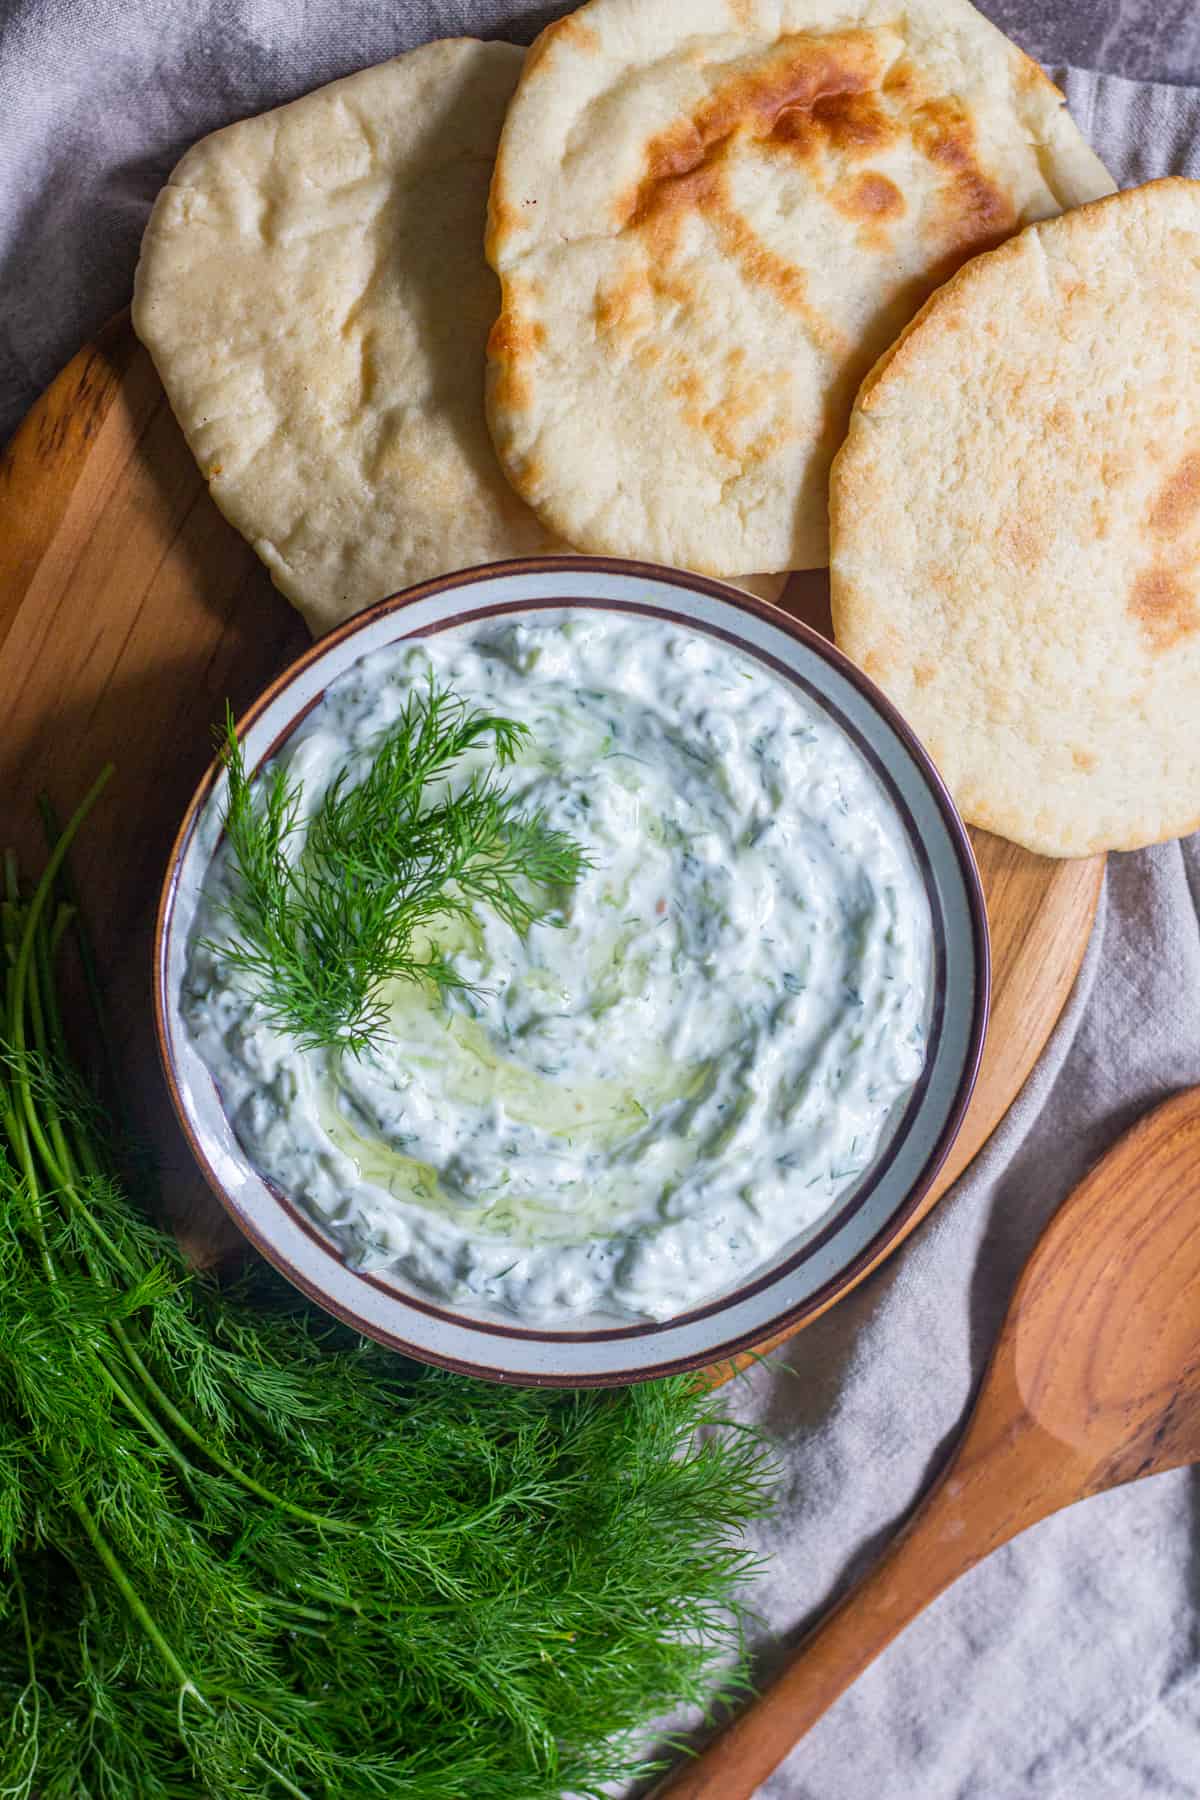 Tzatziki is flavored with garlic so please be generous with the garlic. Mix well and taste to make sure it has enough salt and acidity. Serve Greek tzatziki sauce cold.